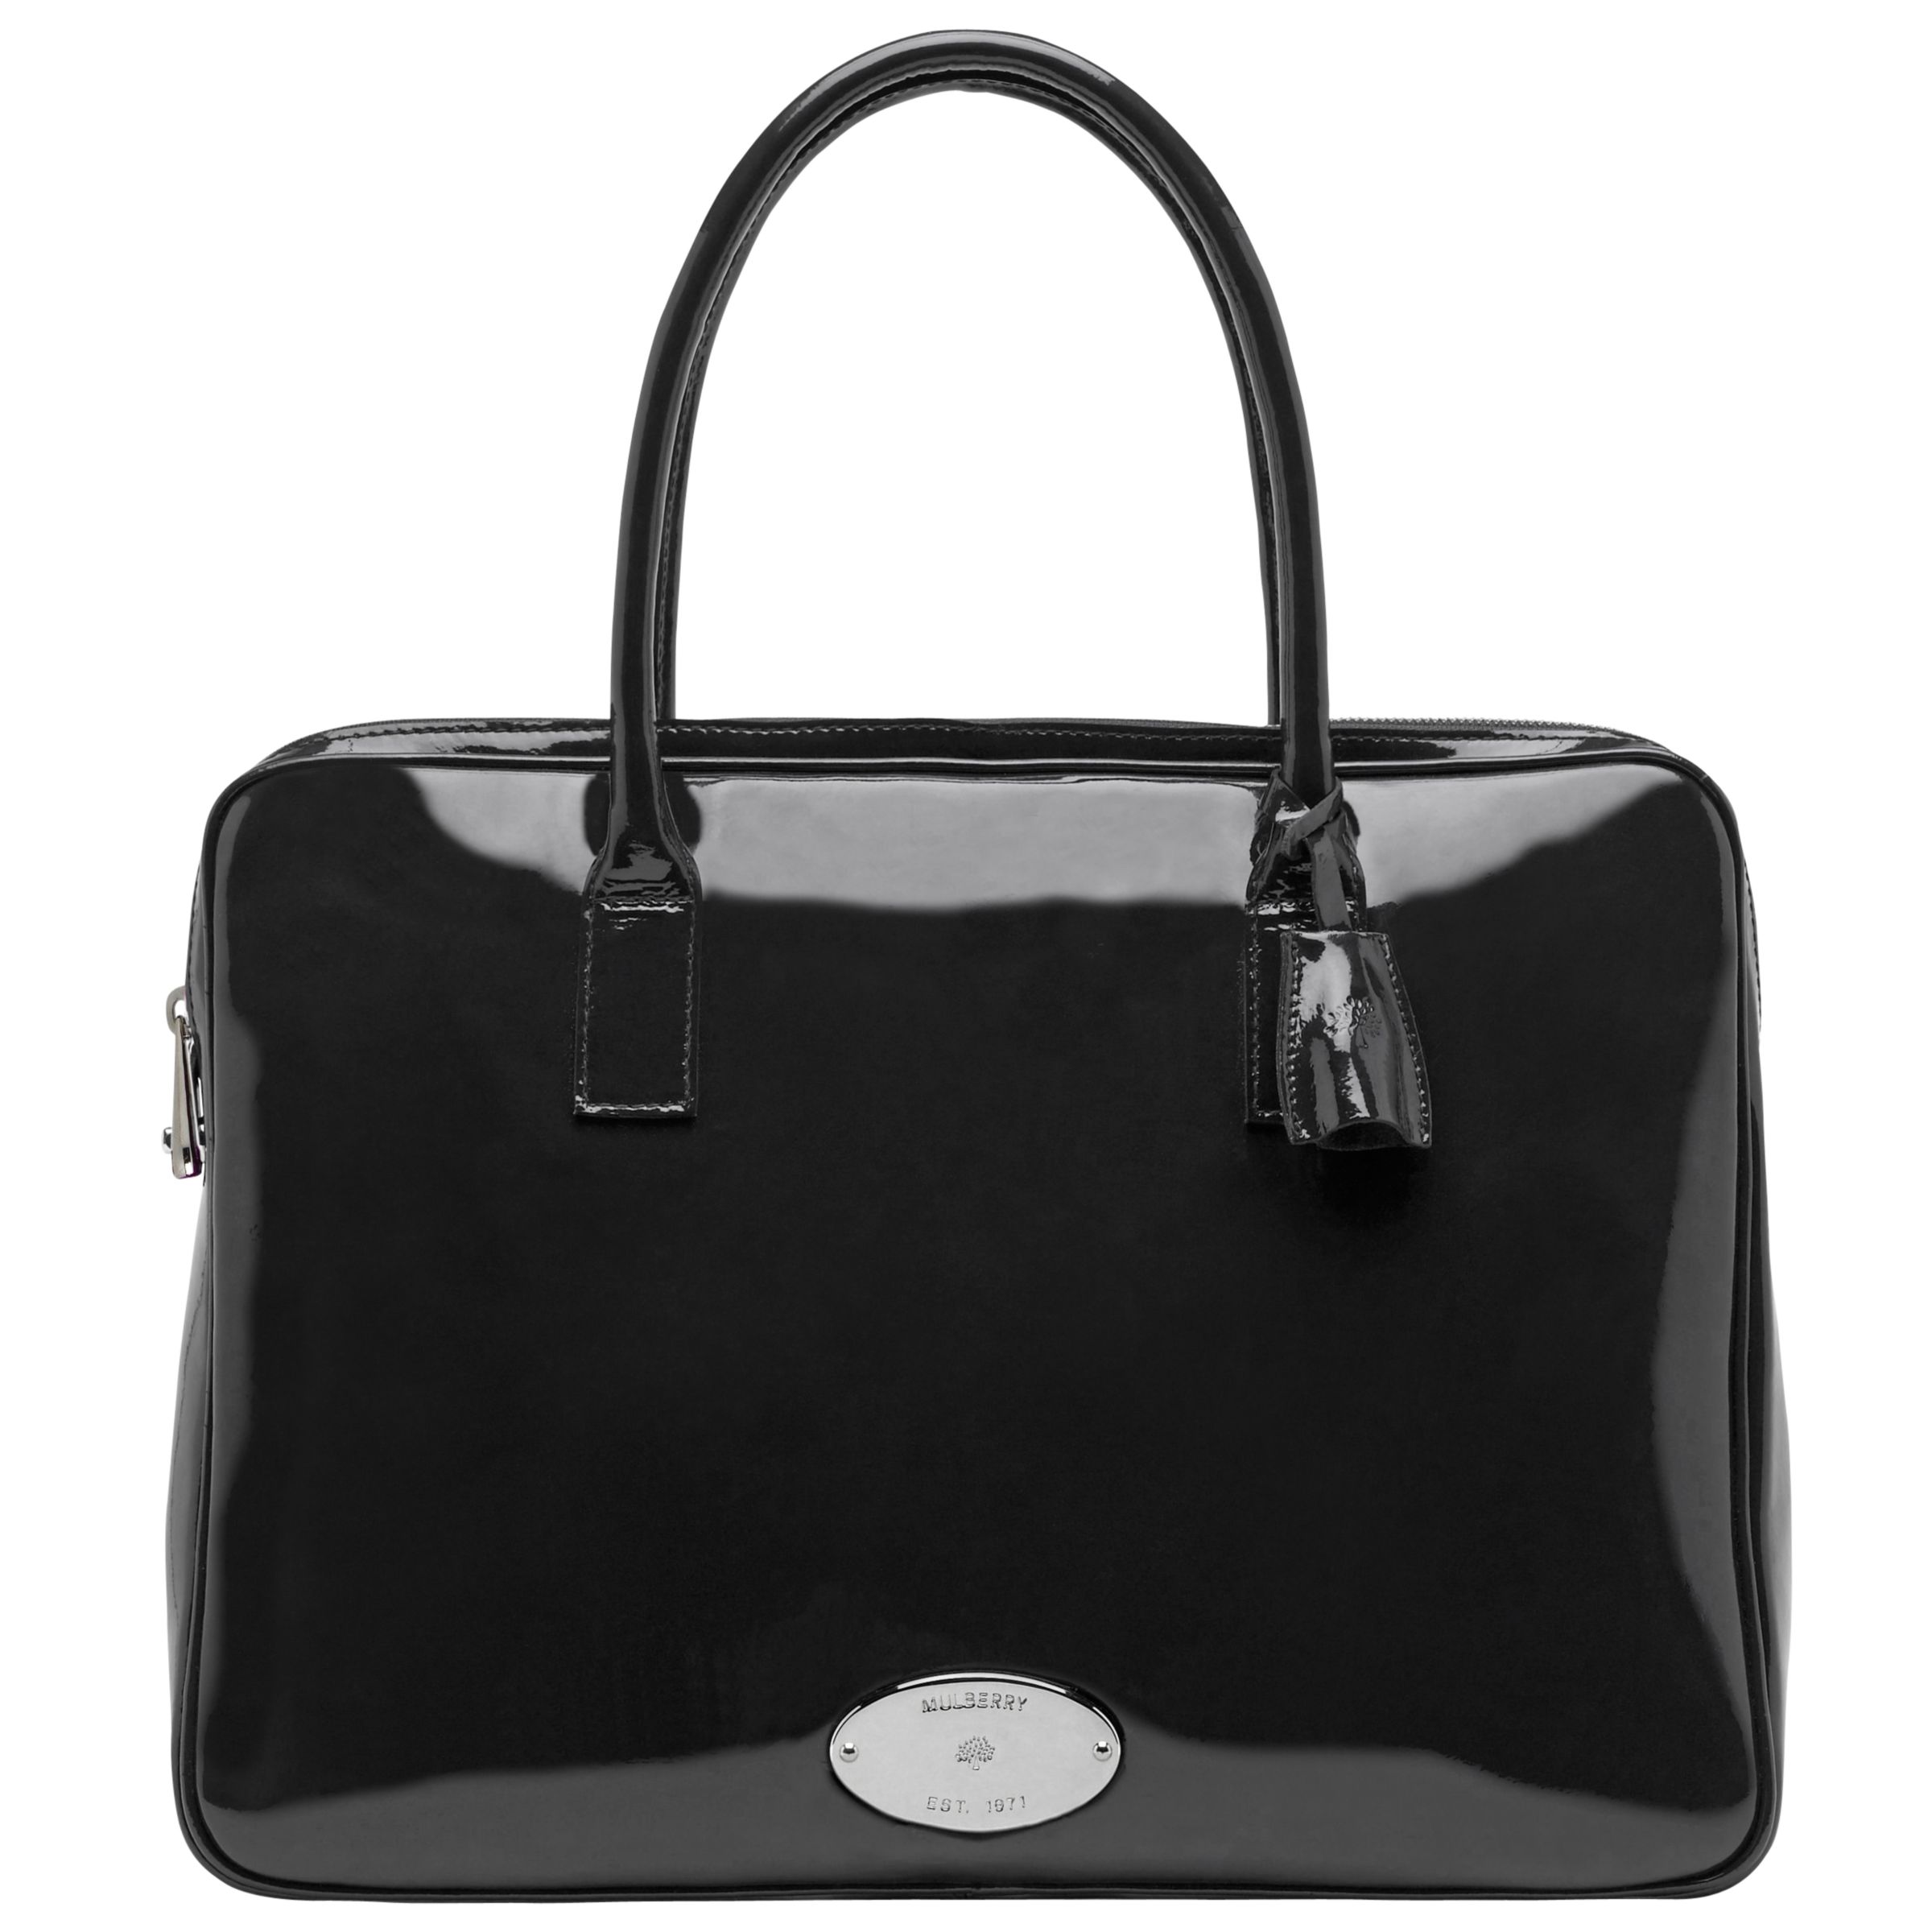 Mulberry Melanie Patent Leather Computer Case, Black at JohnLewis